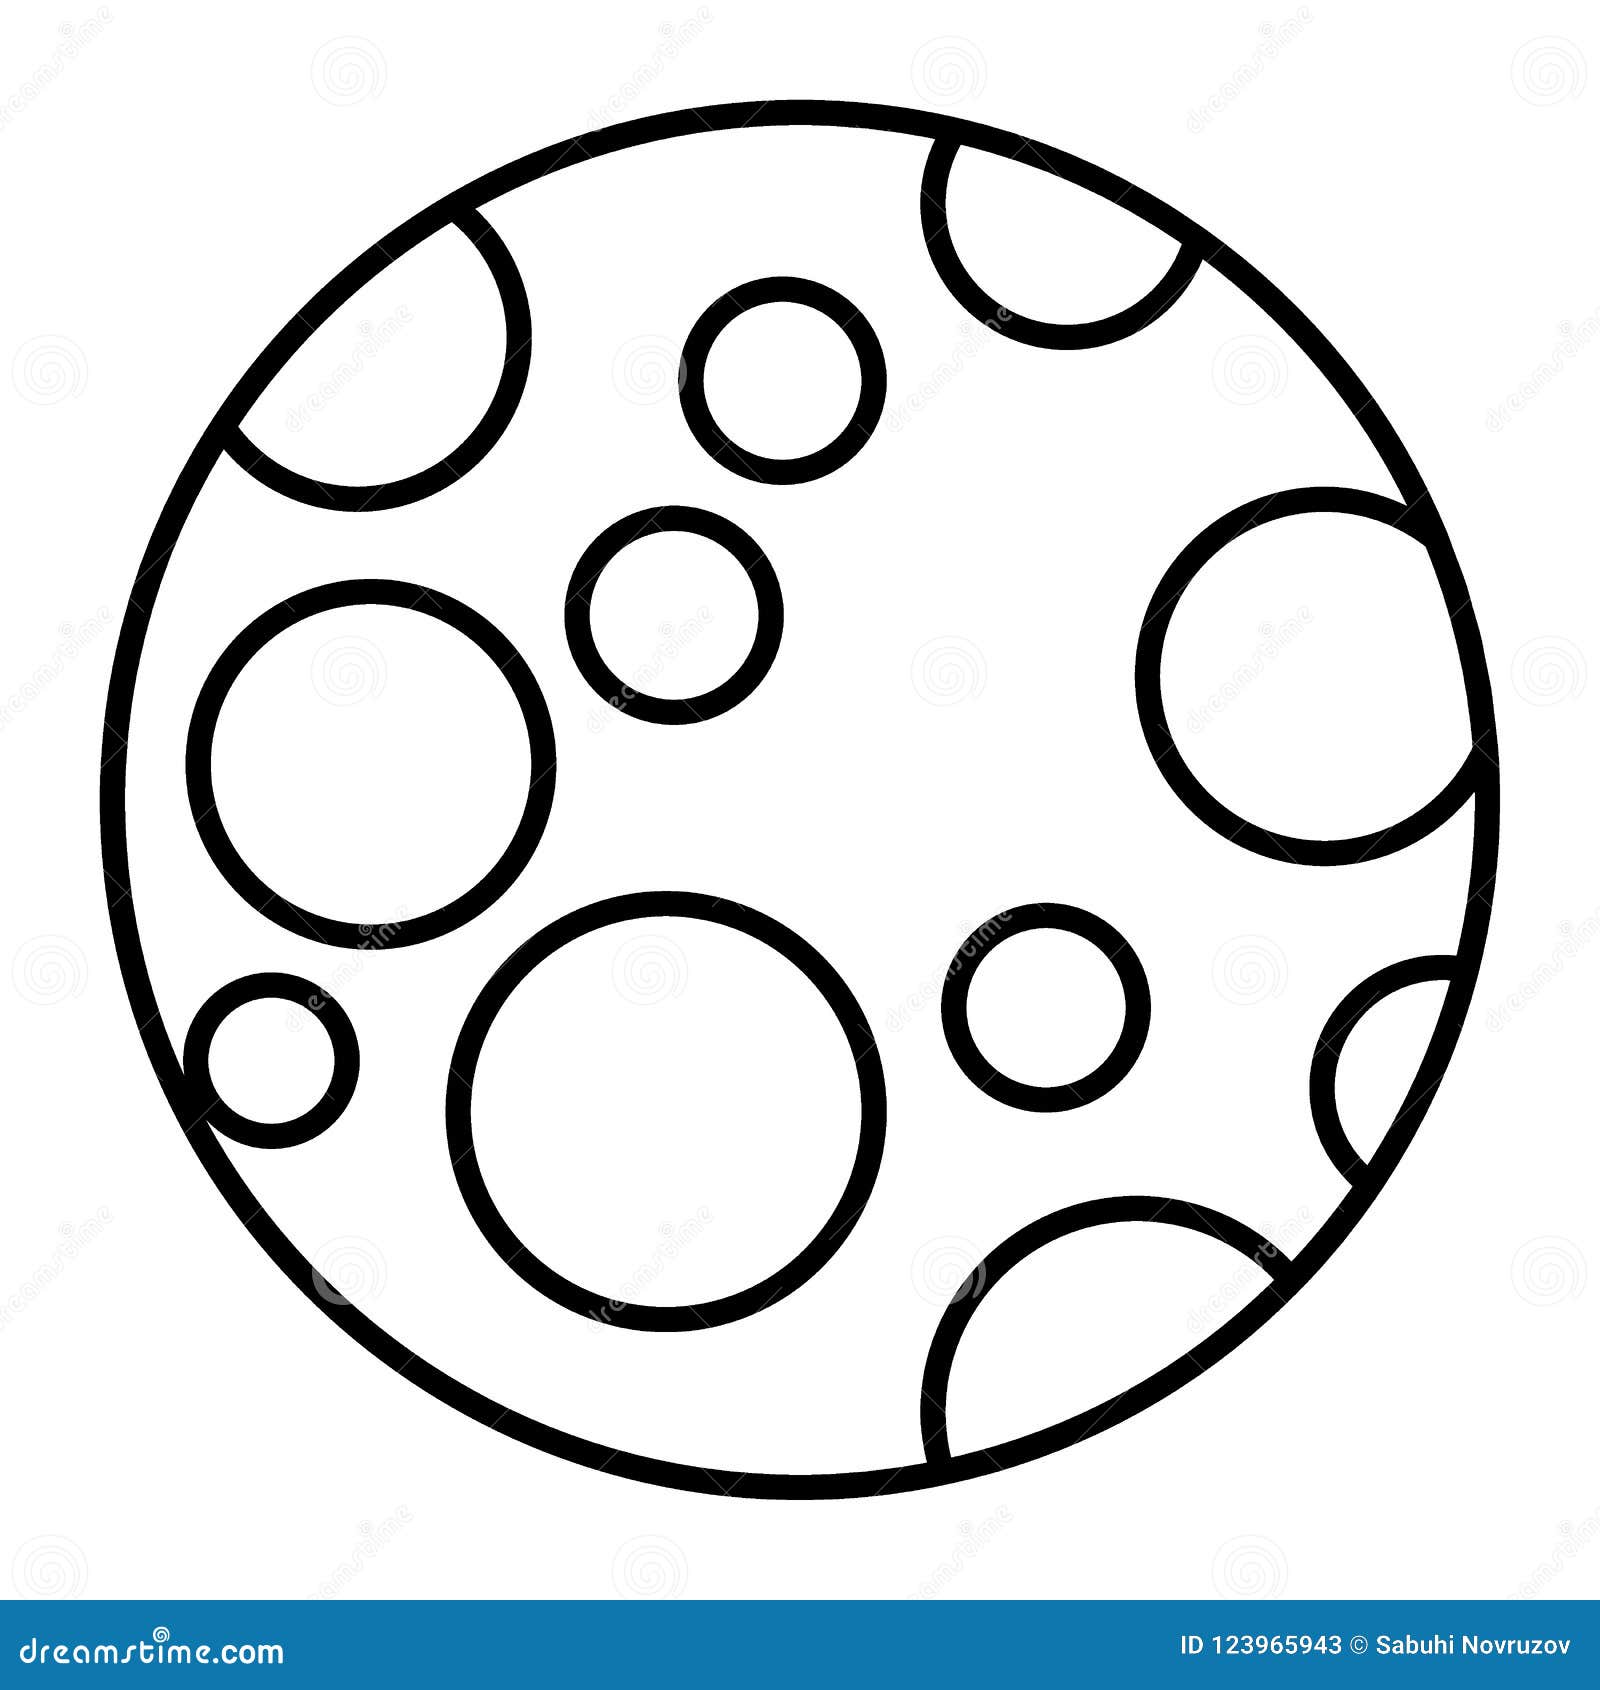 Moon Thin Line Icon. Astronomy Vector Illustration Isolated On White. Moon With Craters Outline ...